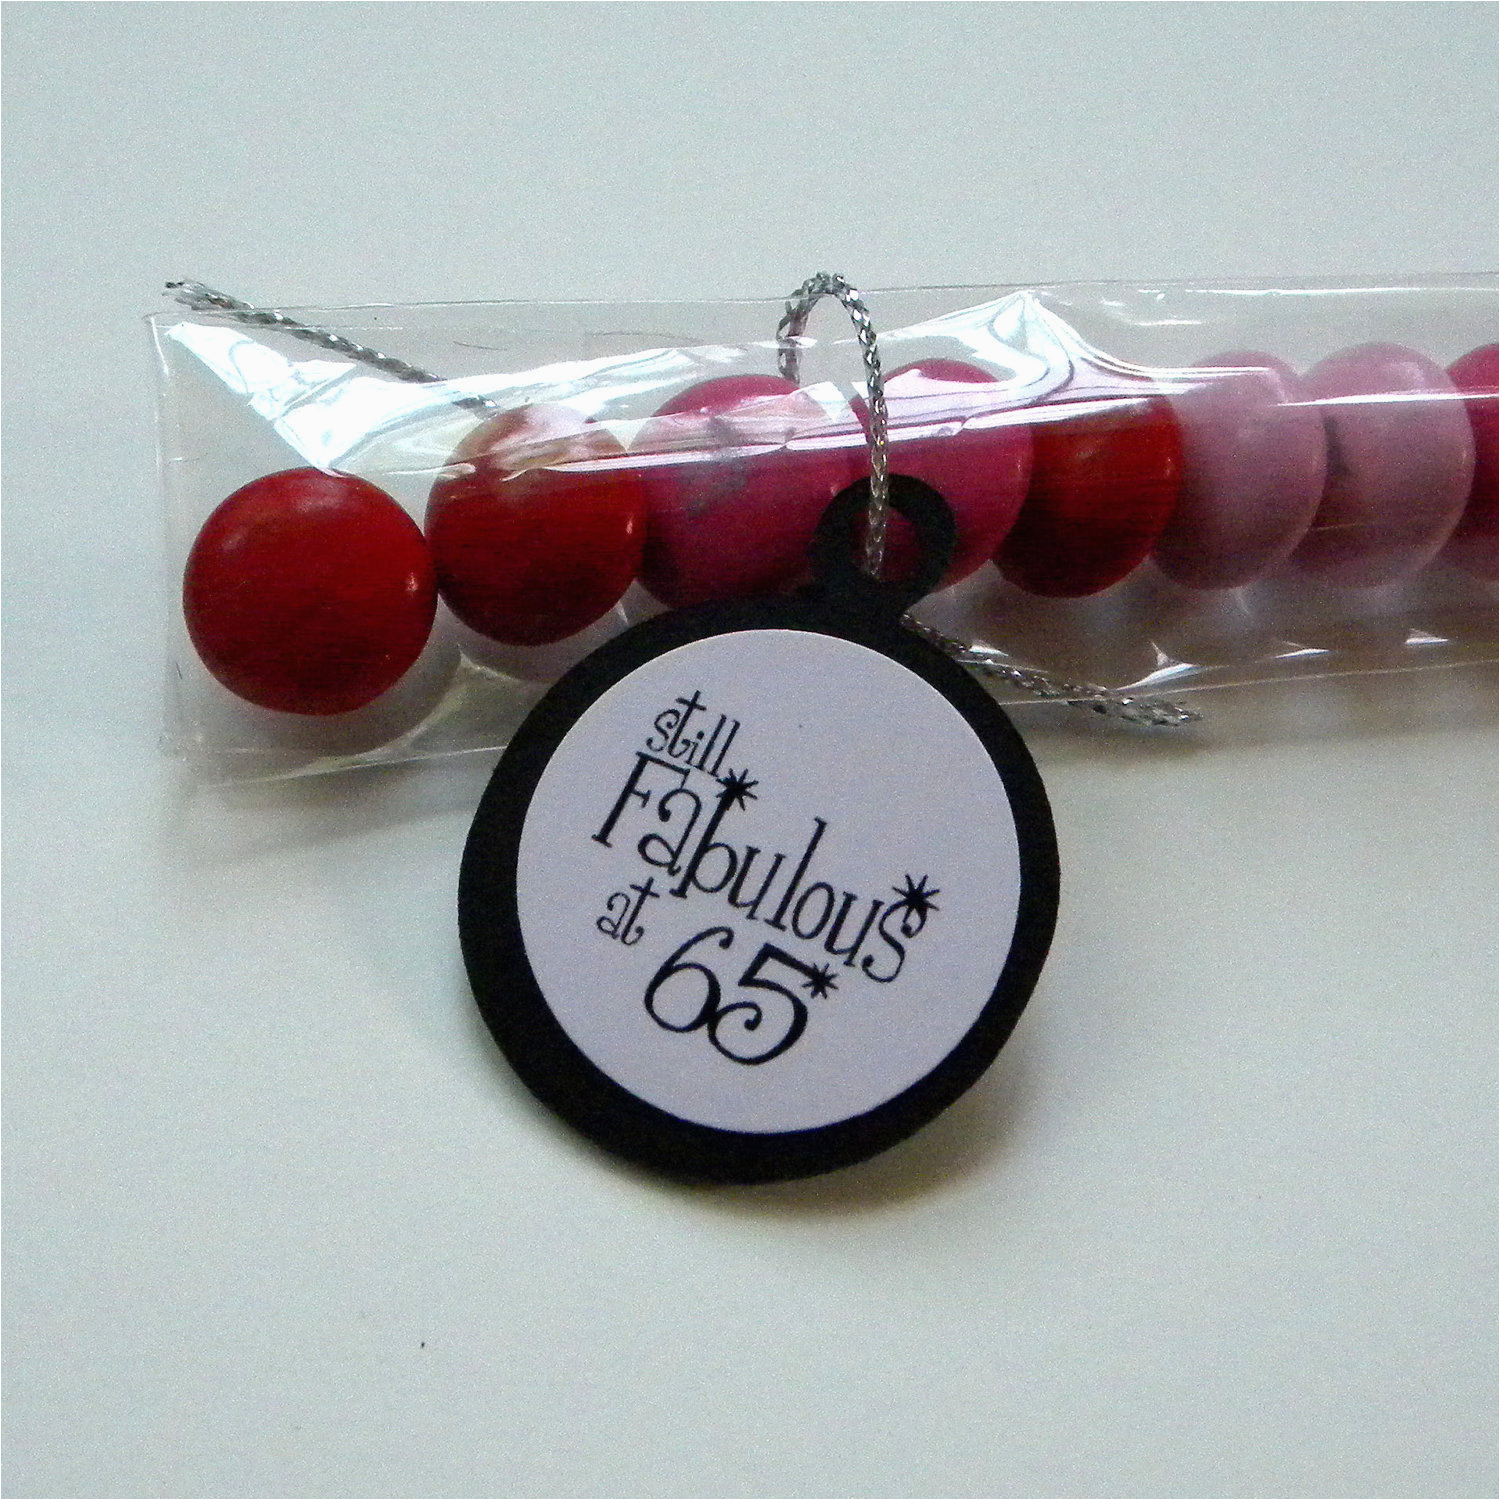 65th birthday party favors candy treat